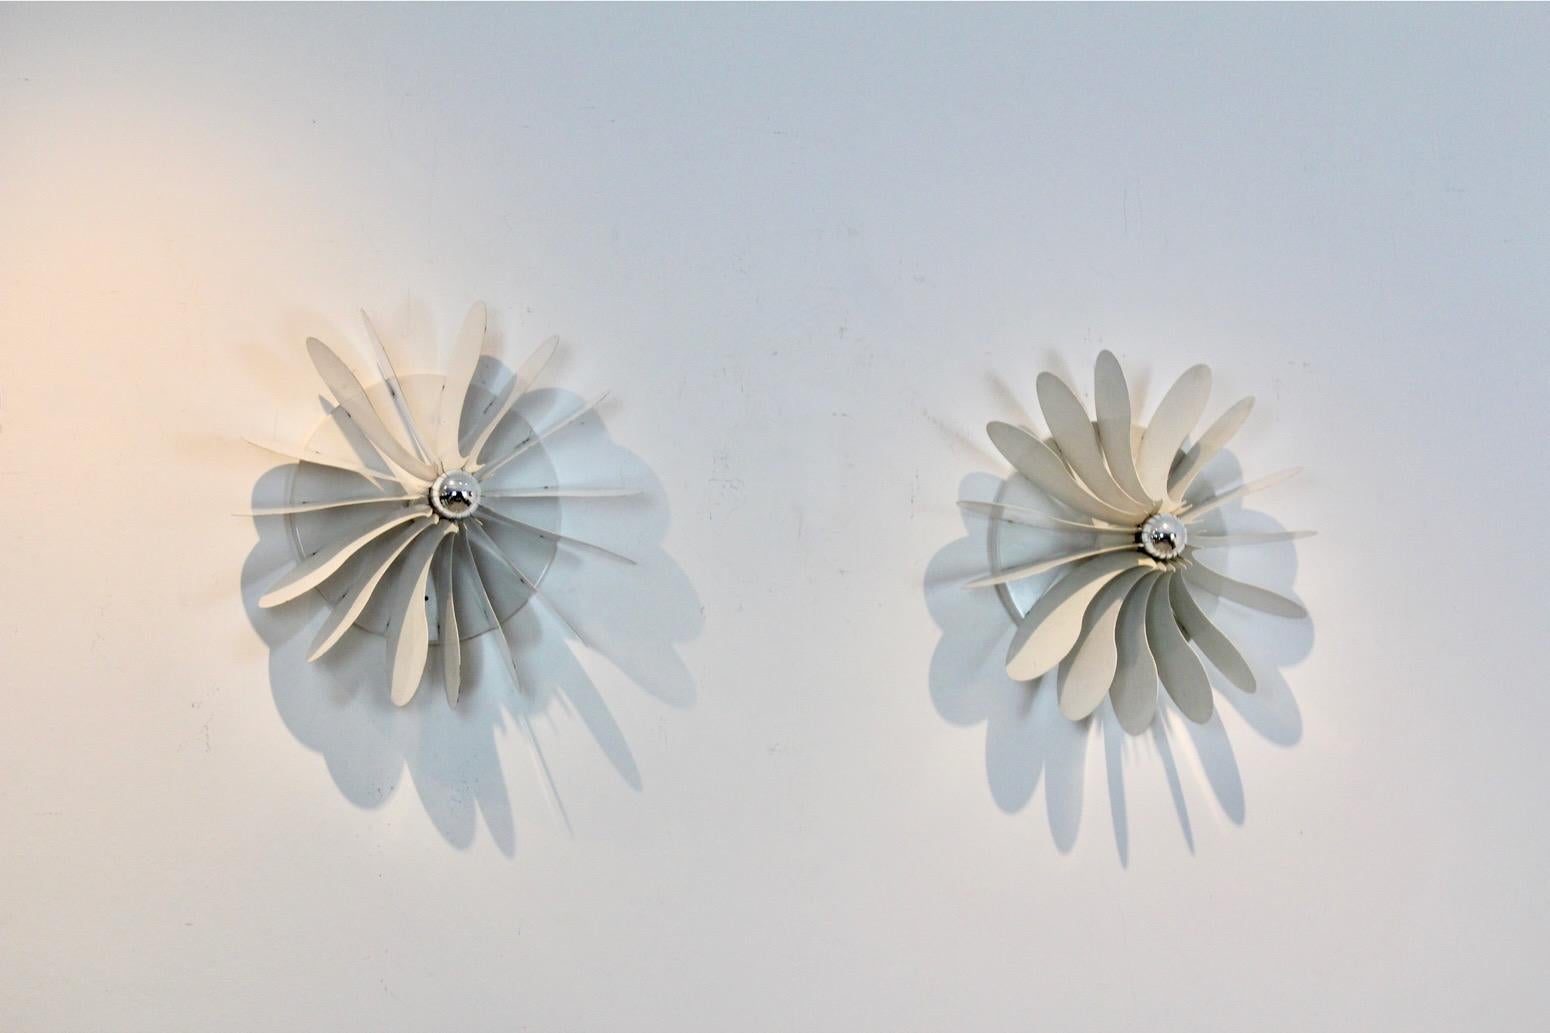 Steel Graphical Bolide Sconces by Hermian Sneyders de Vogel for RAAK, Amsterdam, 4 pcs For Sale